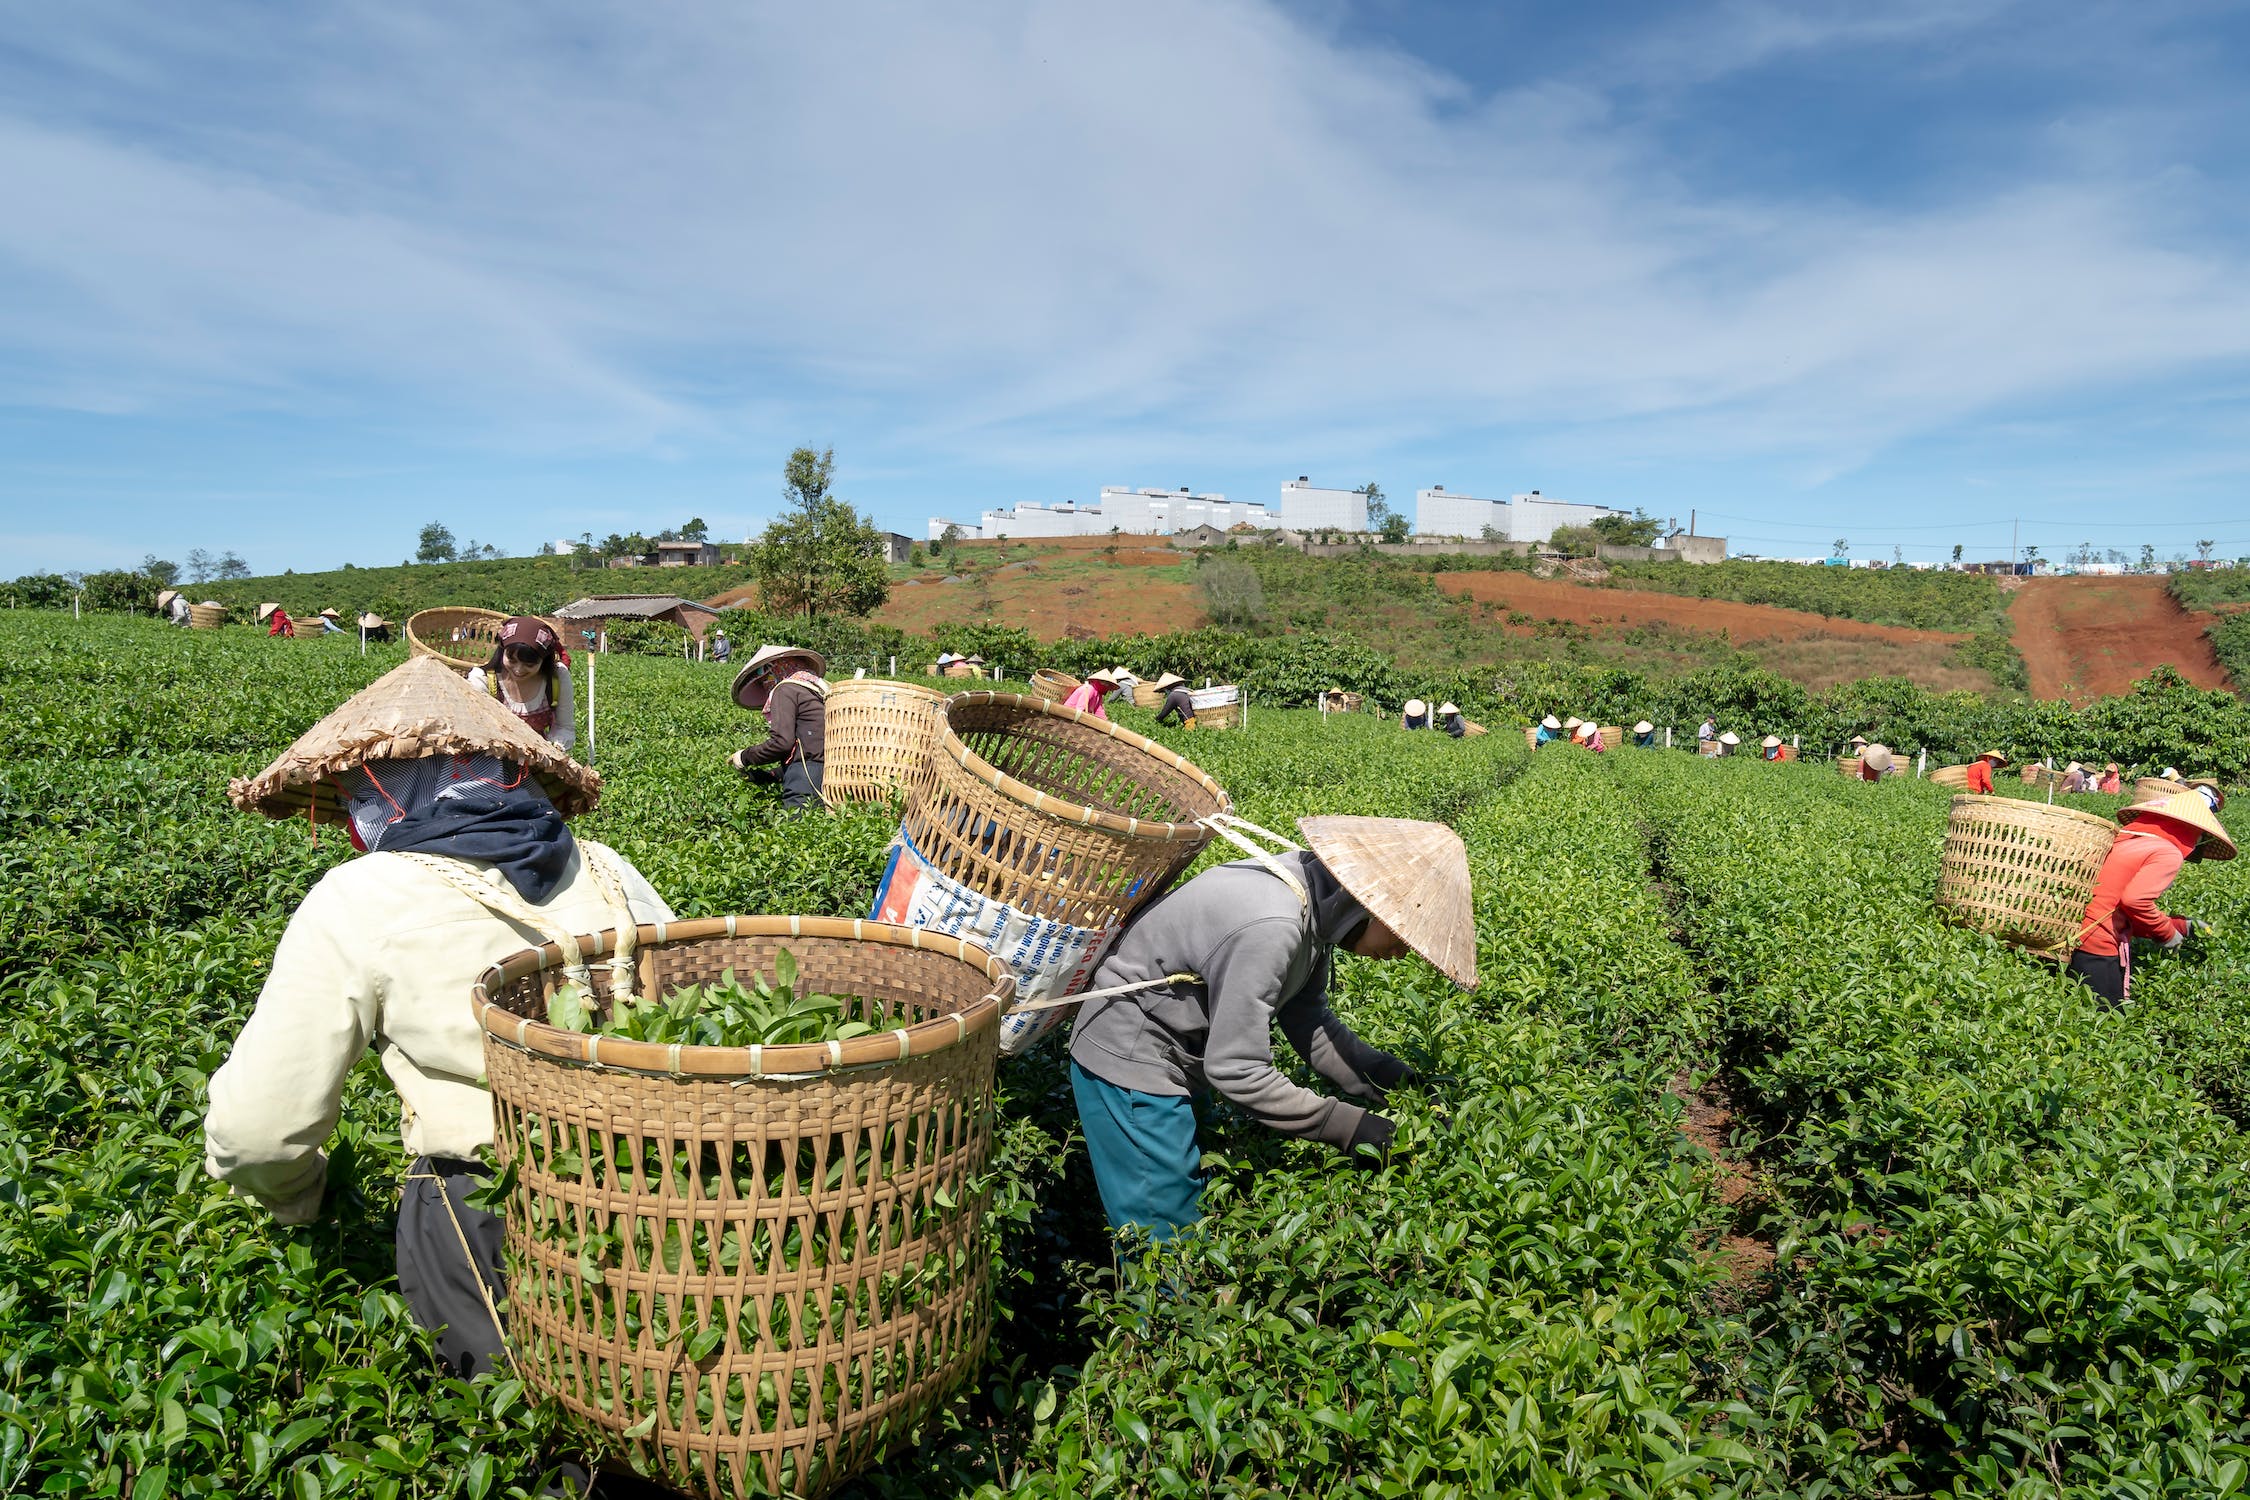 A group of farmers harvesting